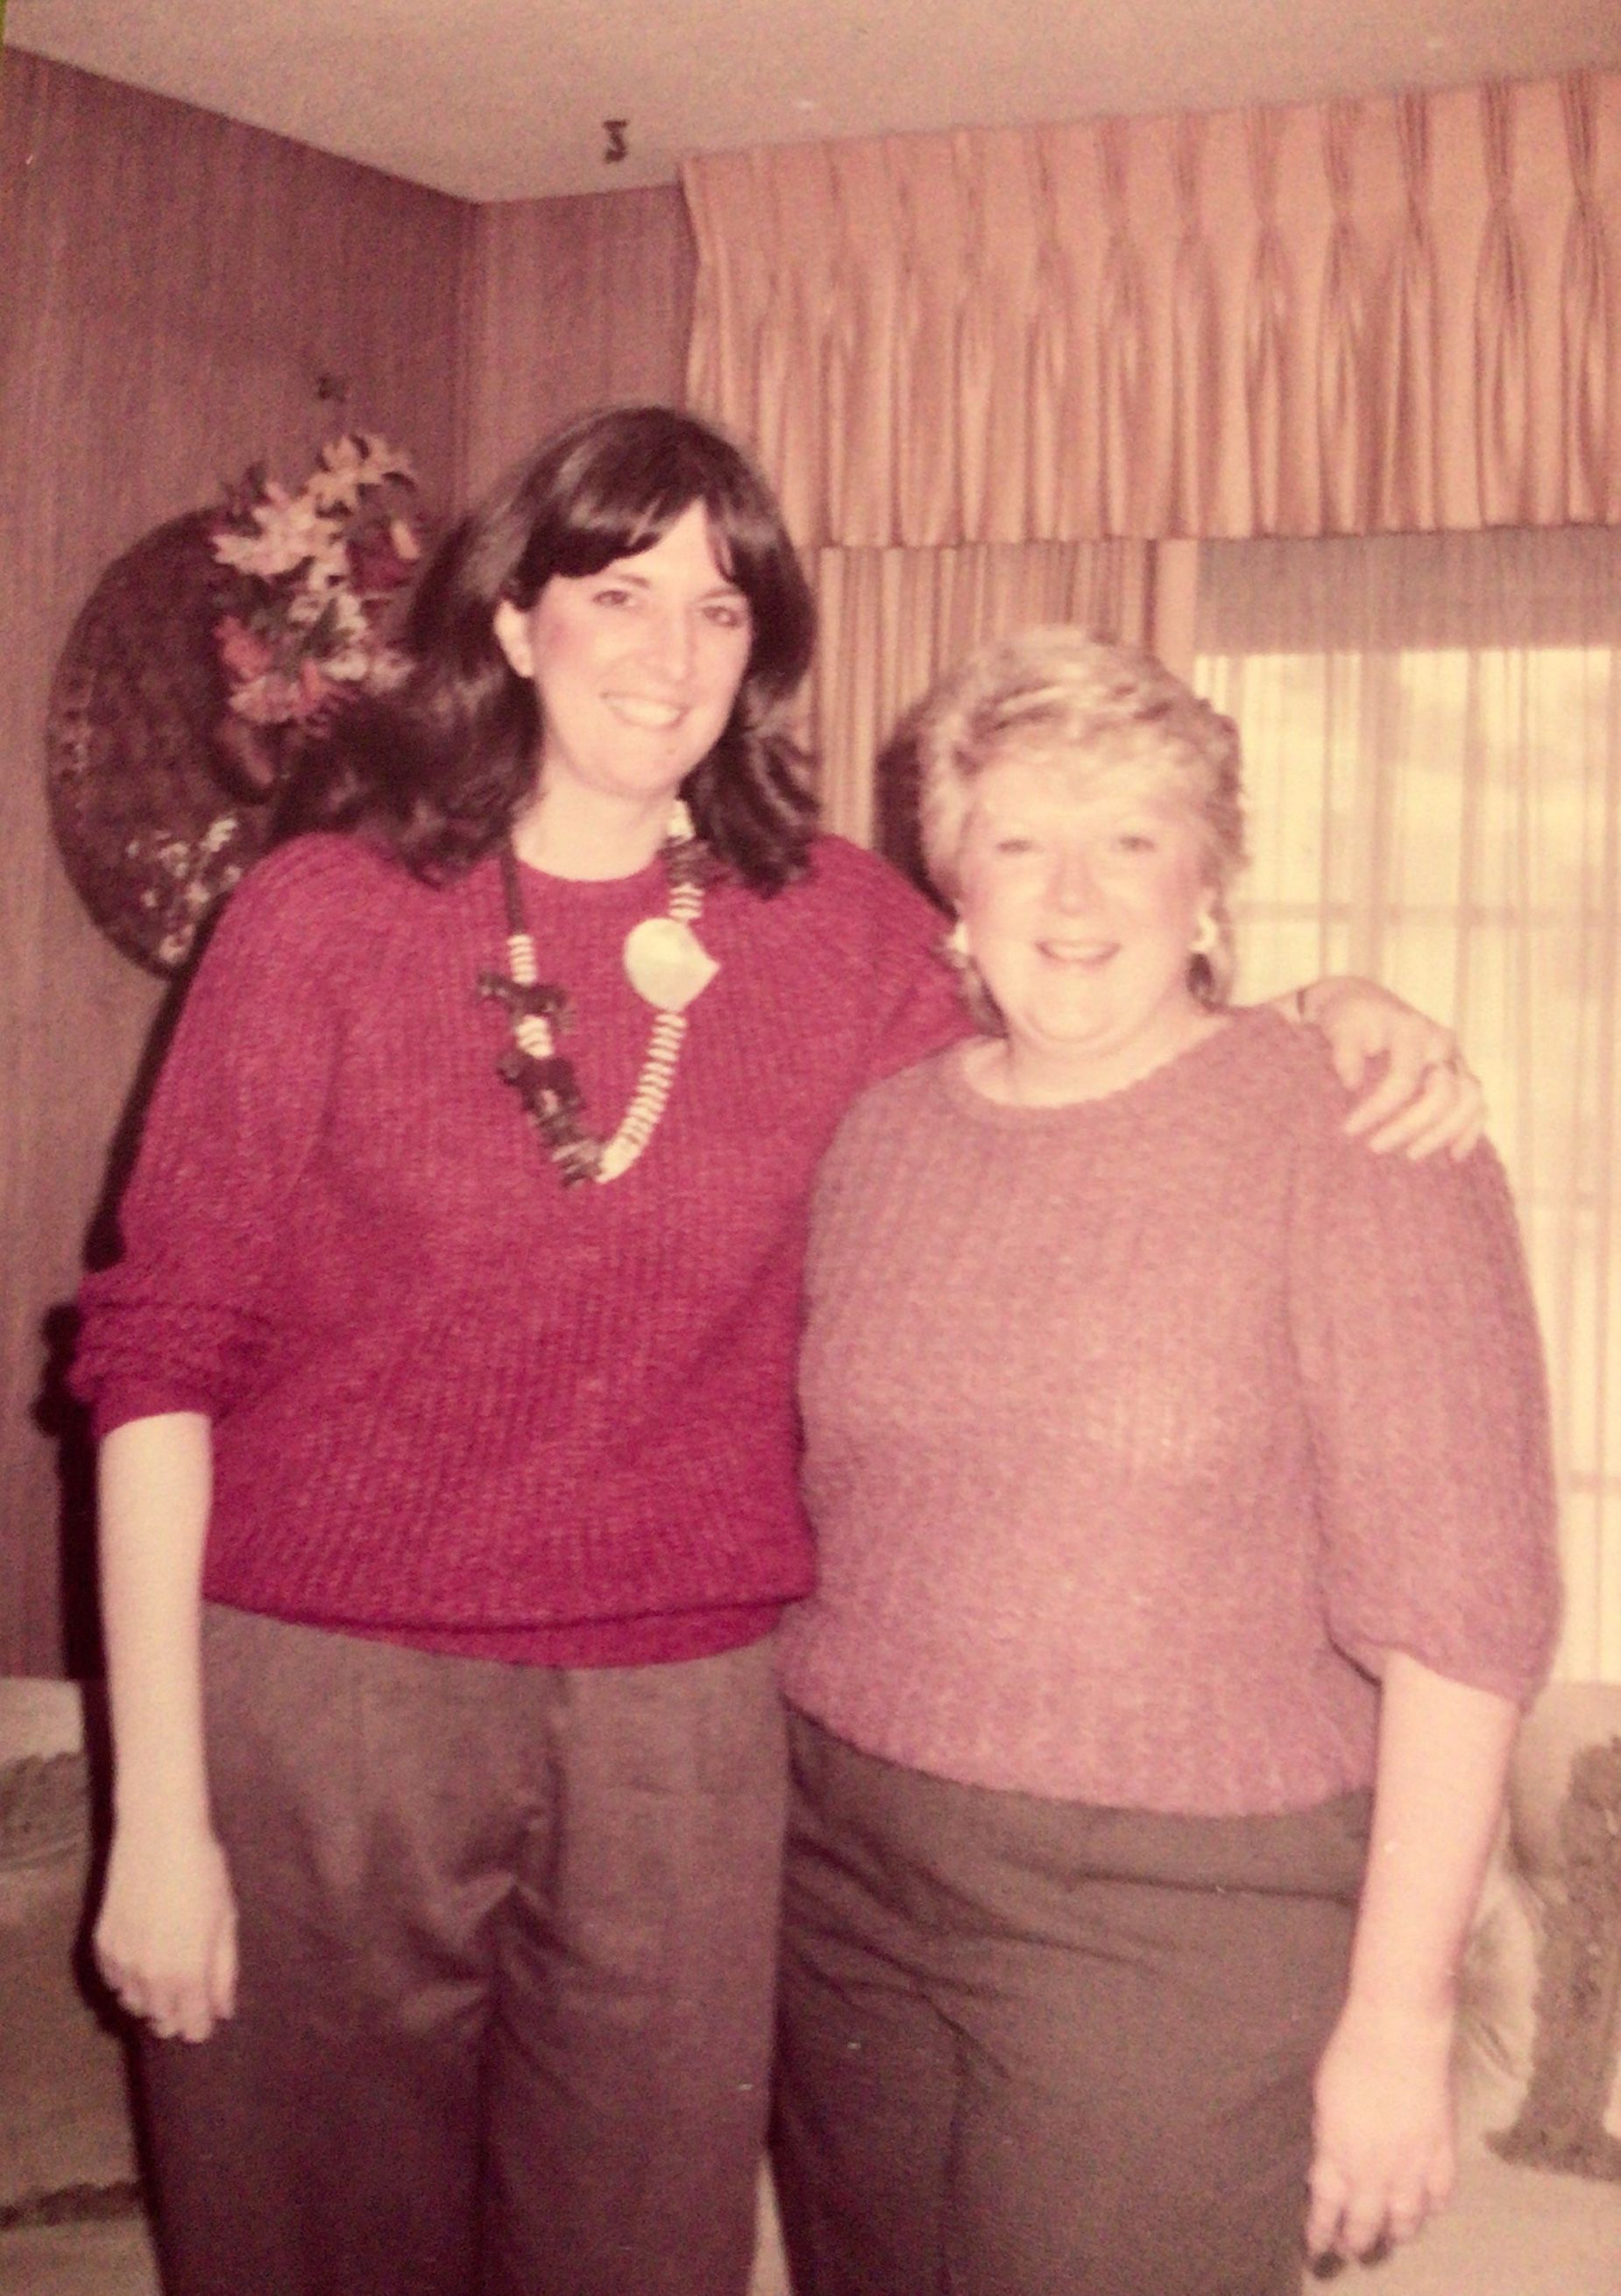 Here's Debbie and Cathy photographed in 1984.